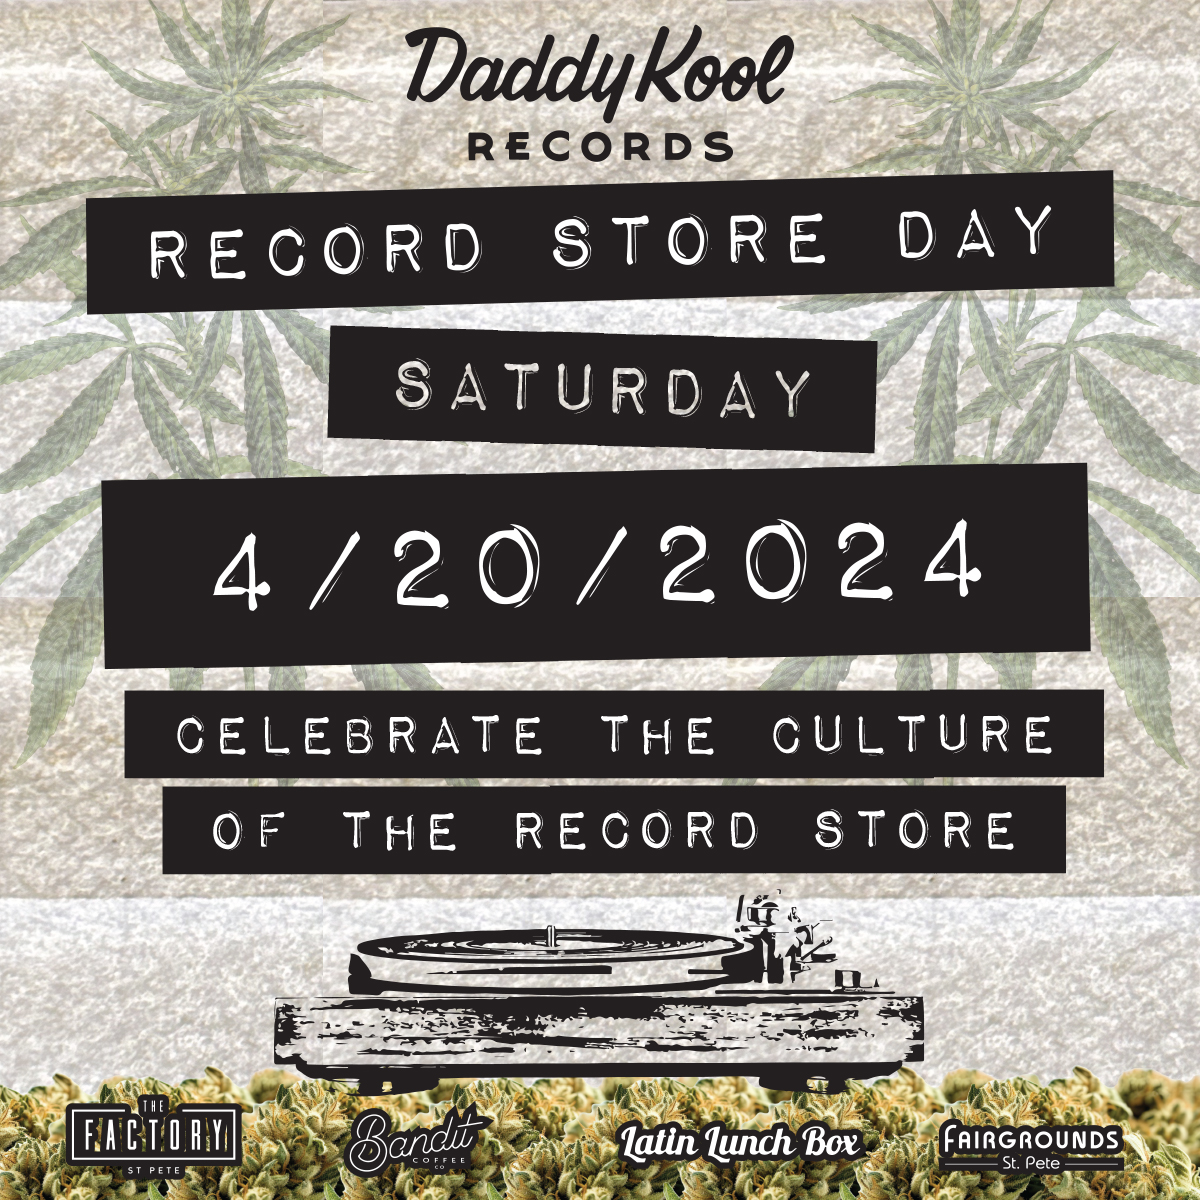 Daddy Kool Records Record Store Day Tampa Bay St Pete Petersburg DTSP